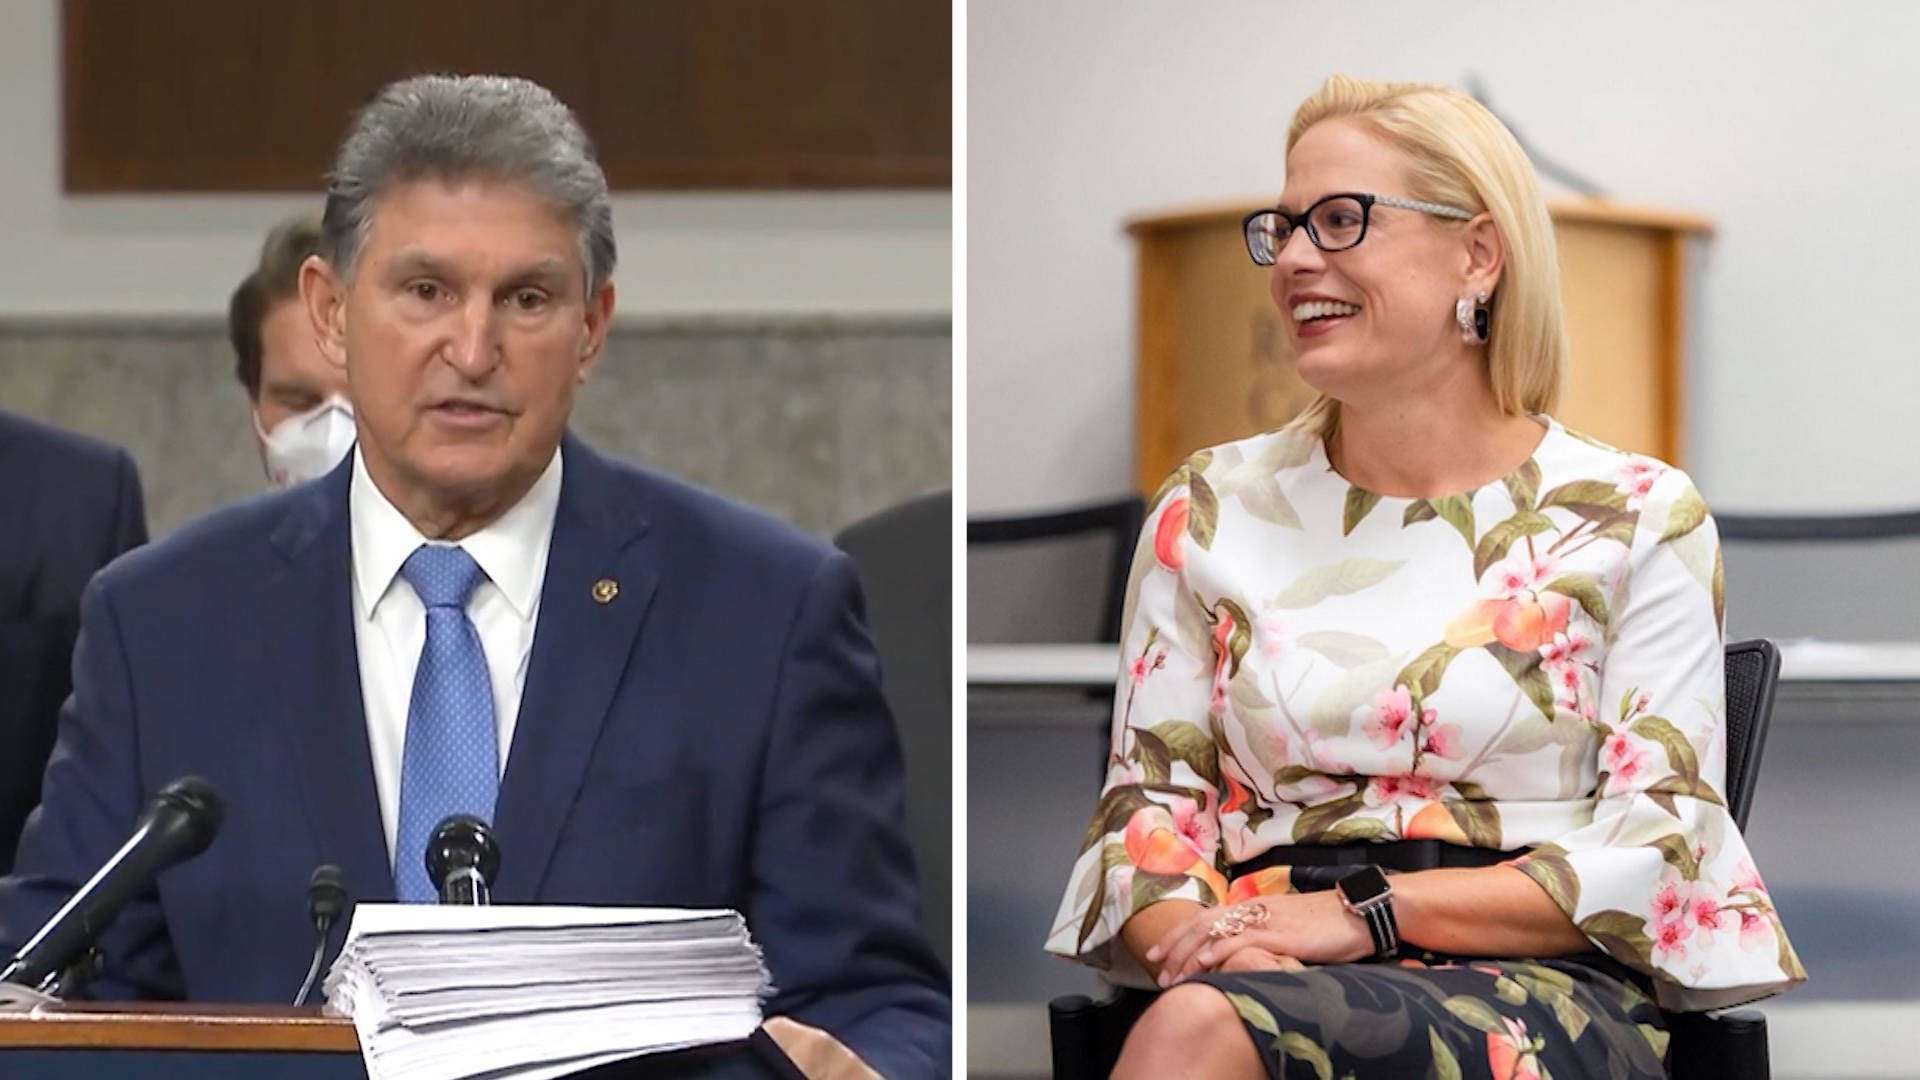 image for “We Need to Deliver”: Anger Grows at Sens. Manchin, Sinema over Obstruction of Democratic Priorities